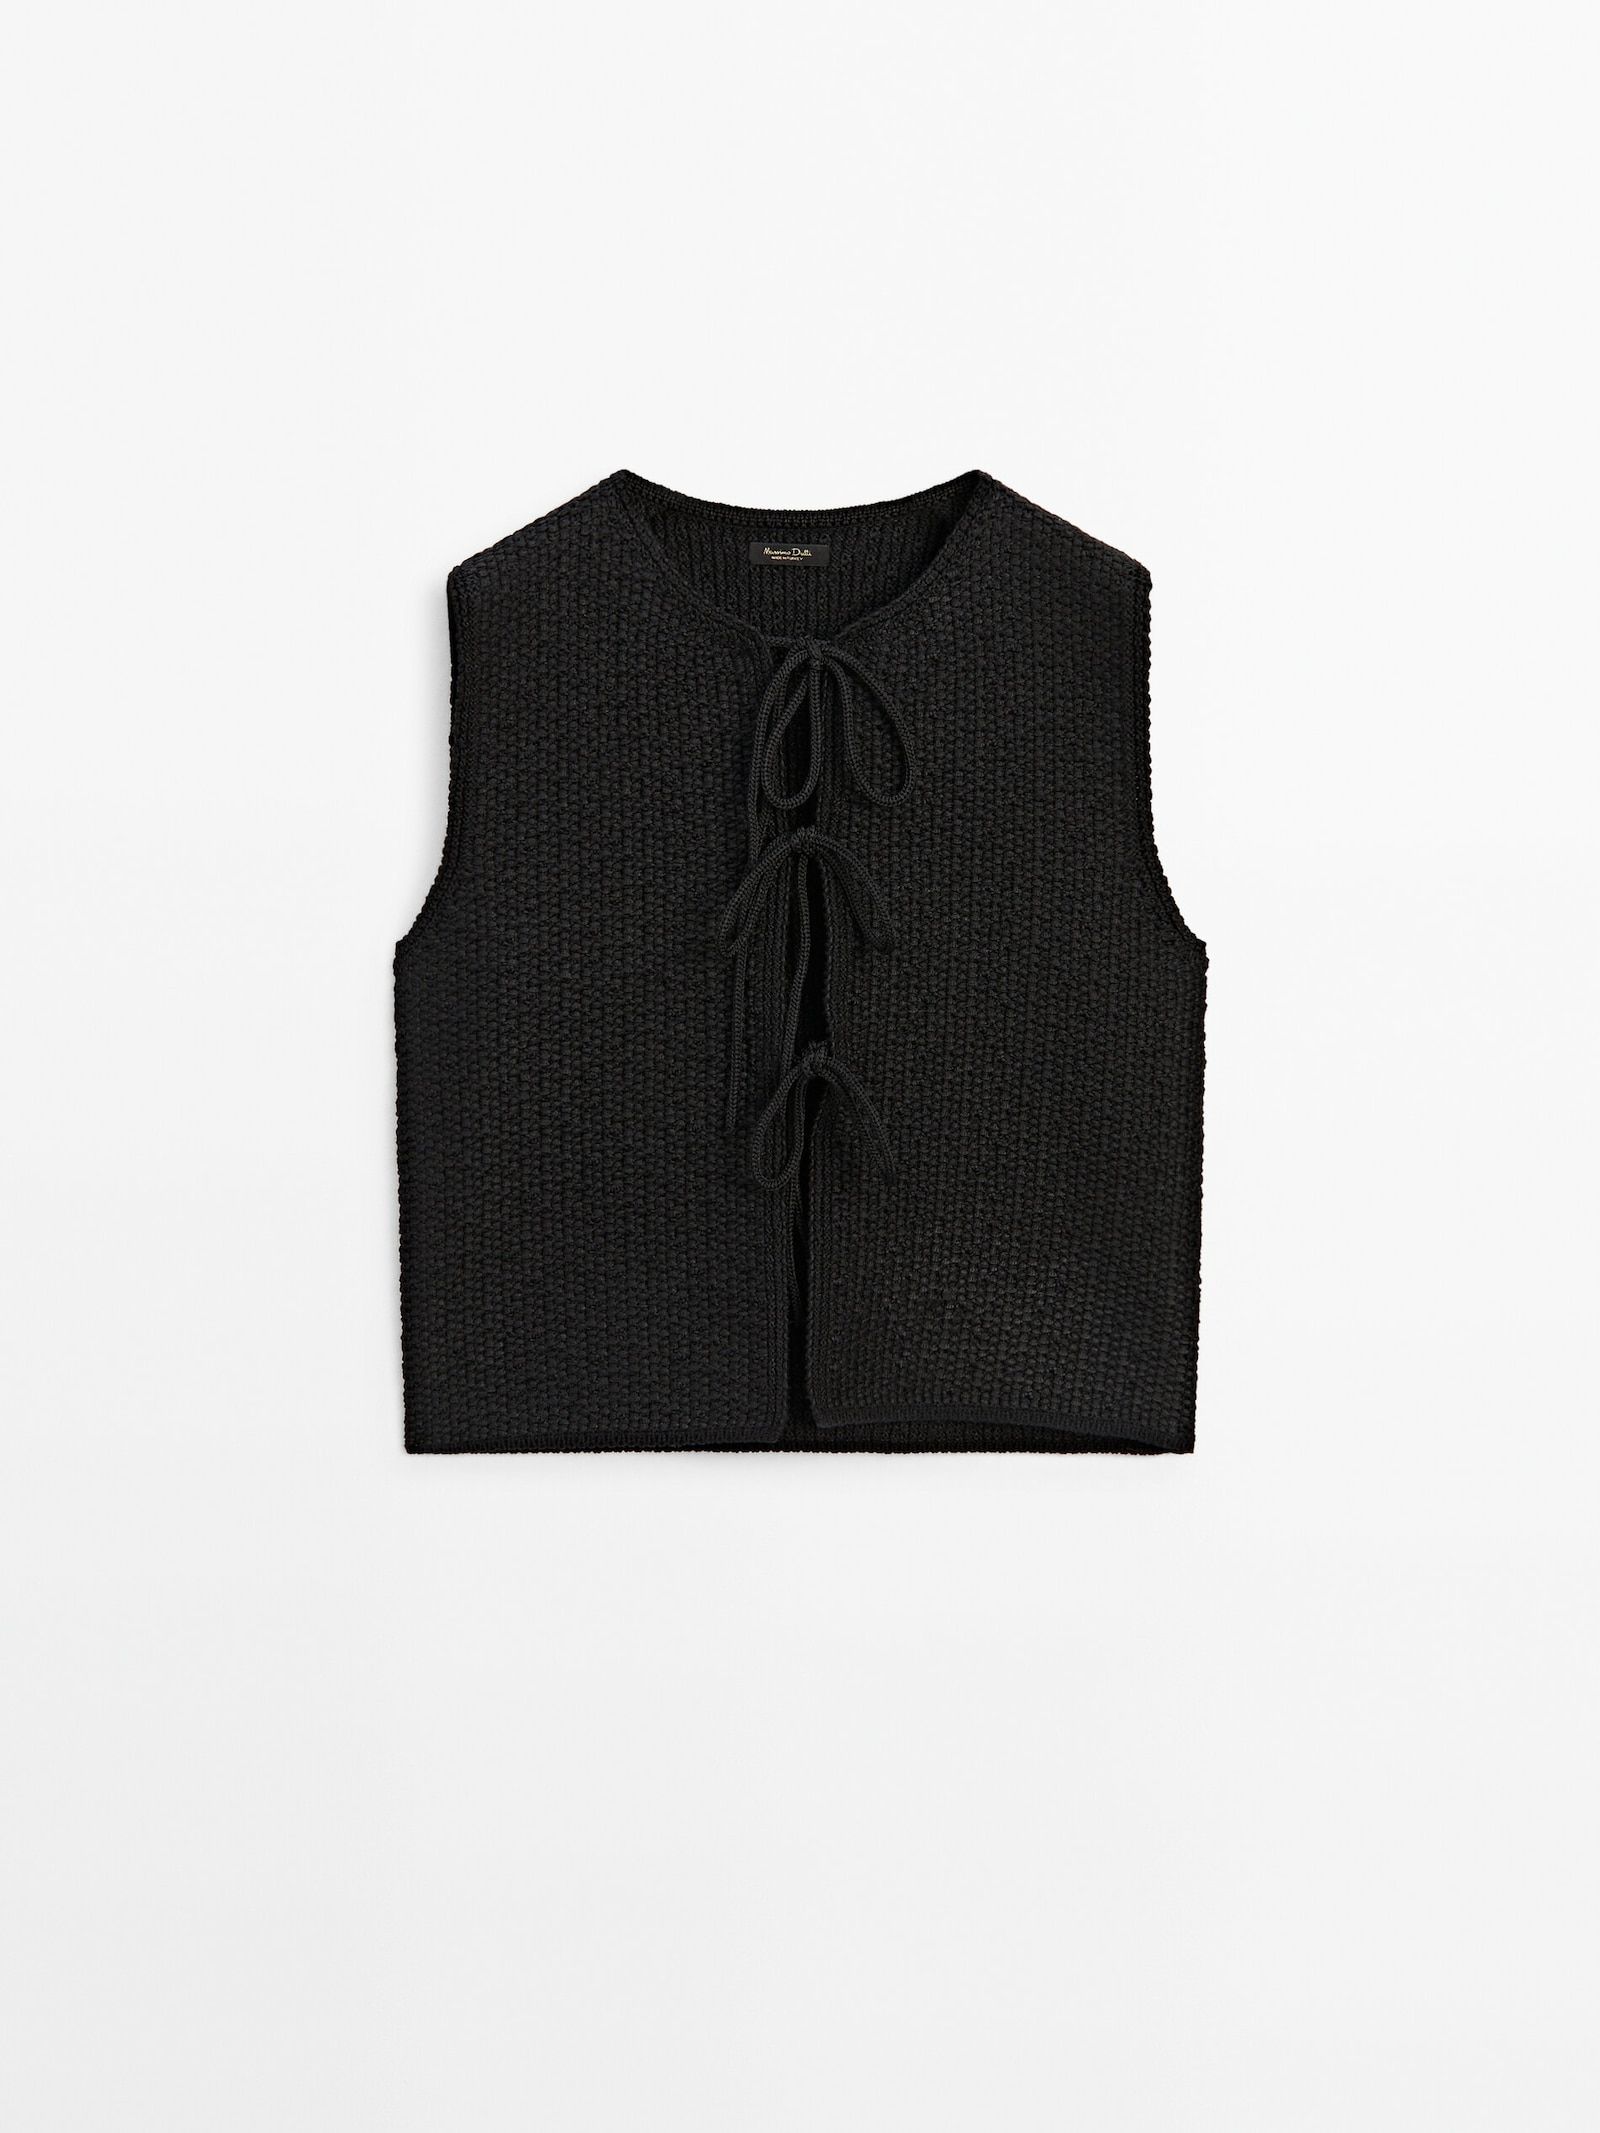 Knit vest with a crew neck and tie details | Massimo Dutti UK